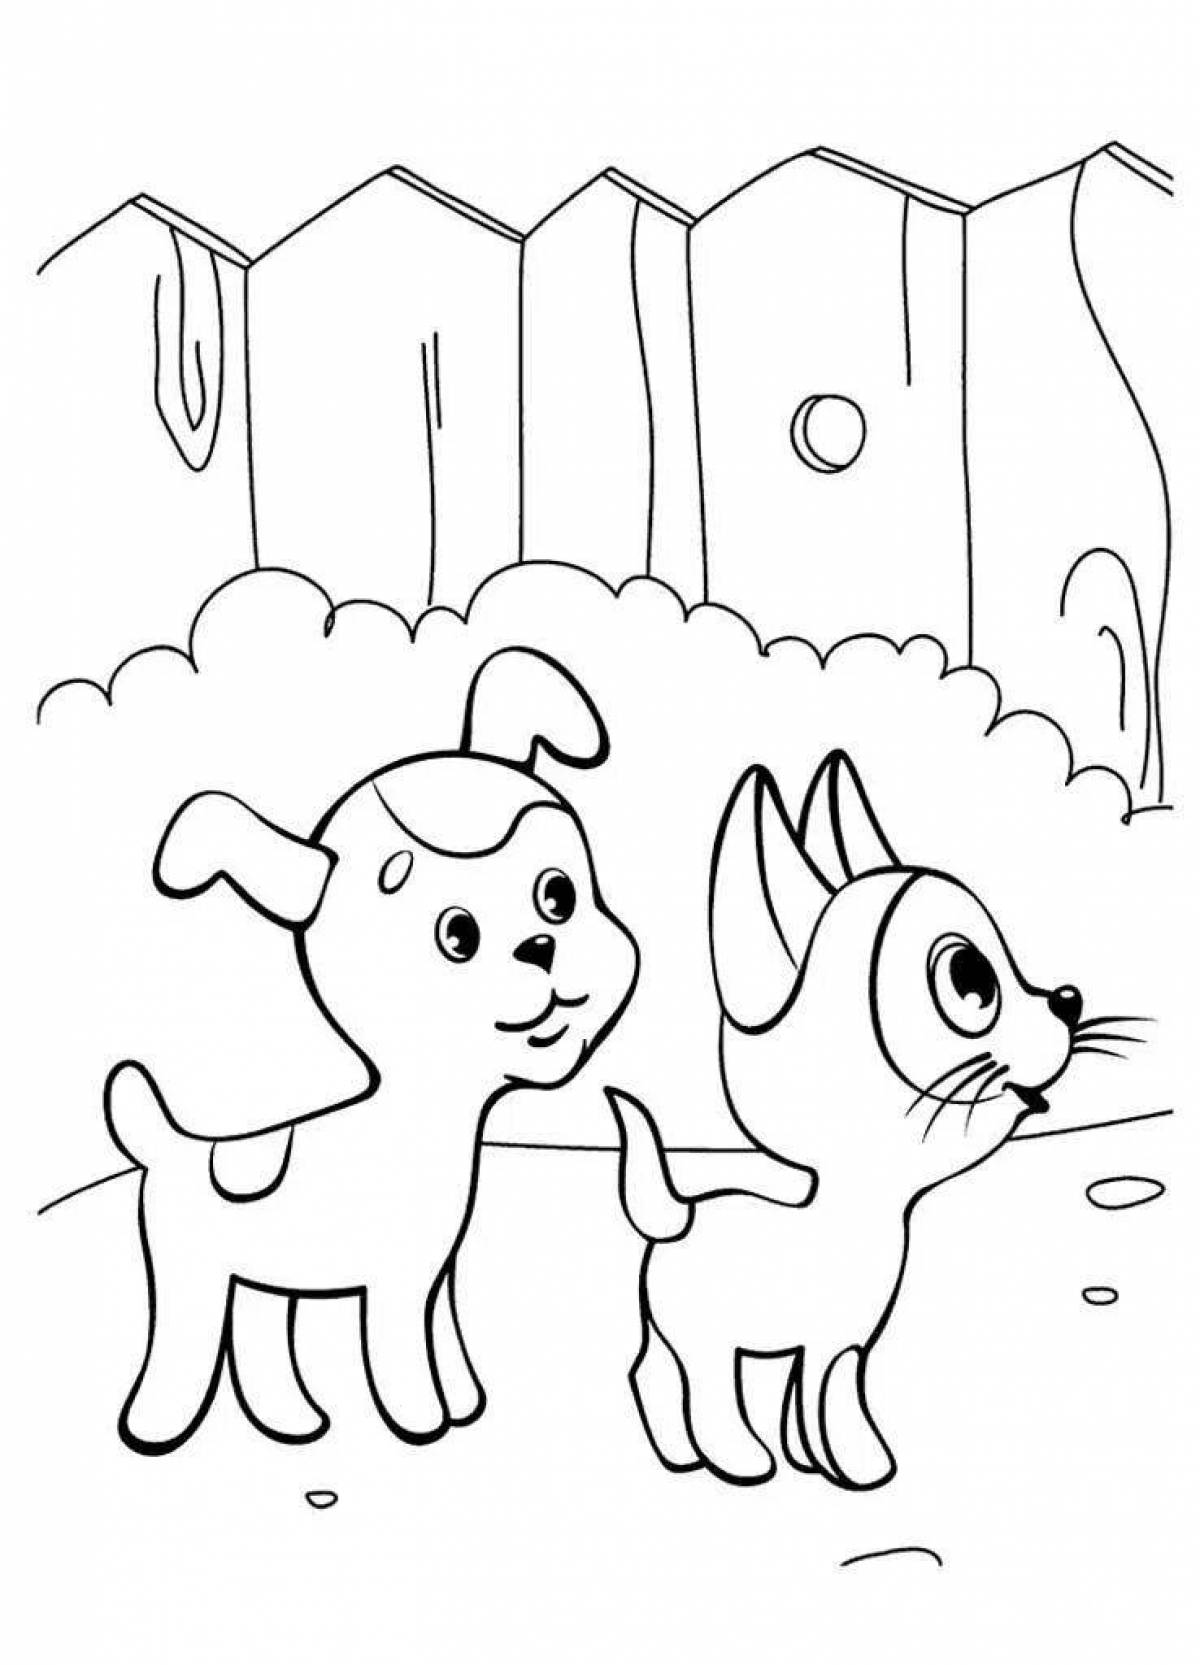 Coloring page hugging kitten and puppy